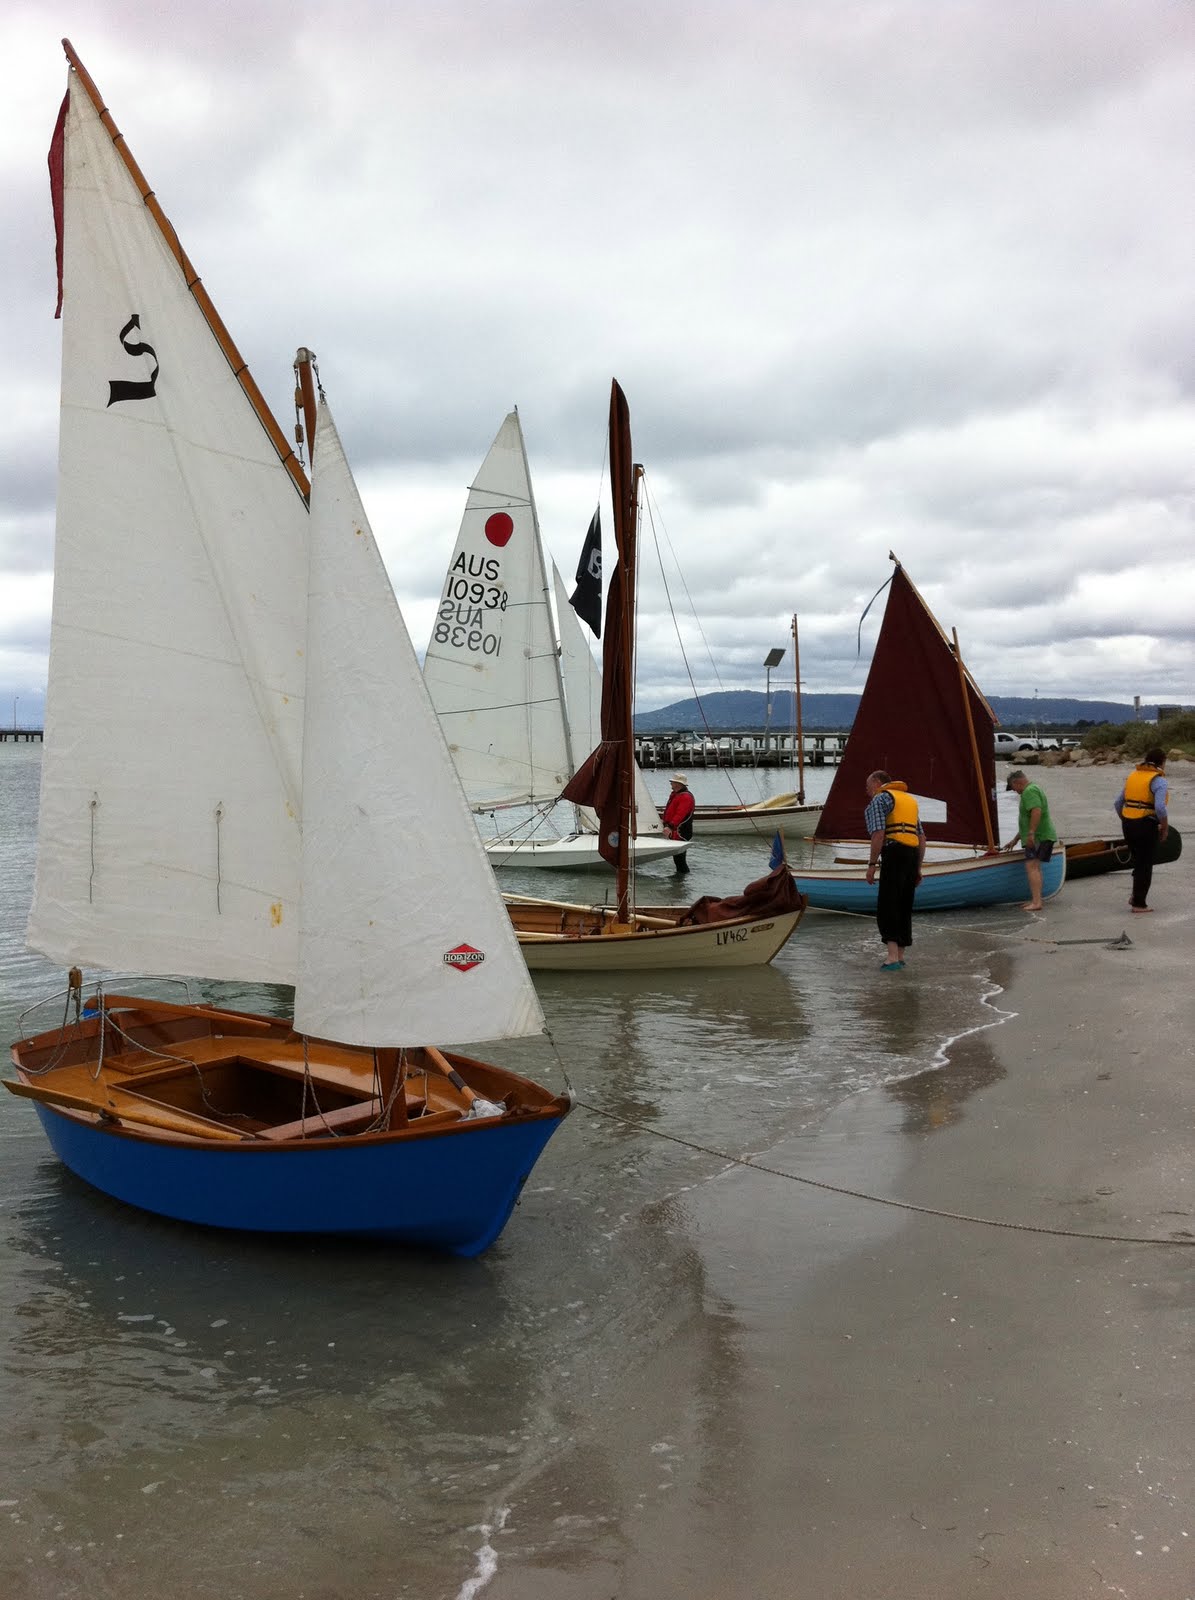 what was the middle thing?: Sail Day with some Wooden Boat 